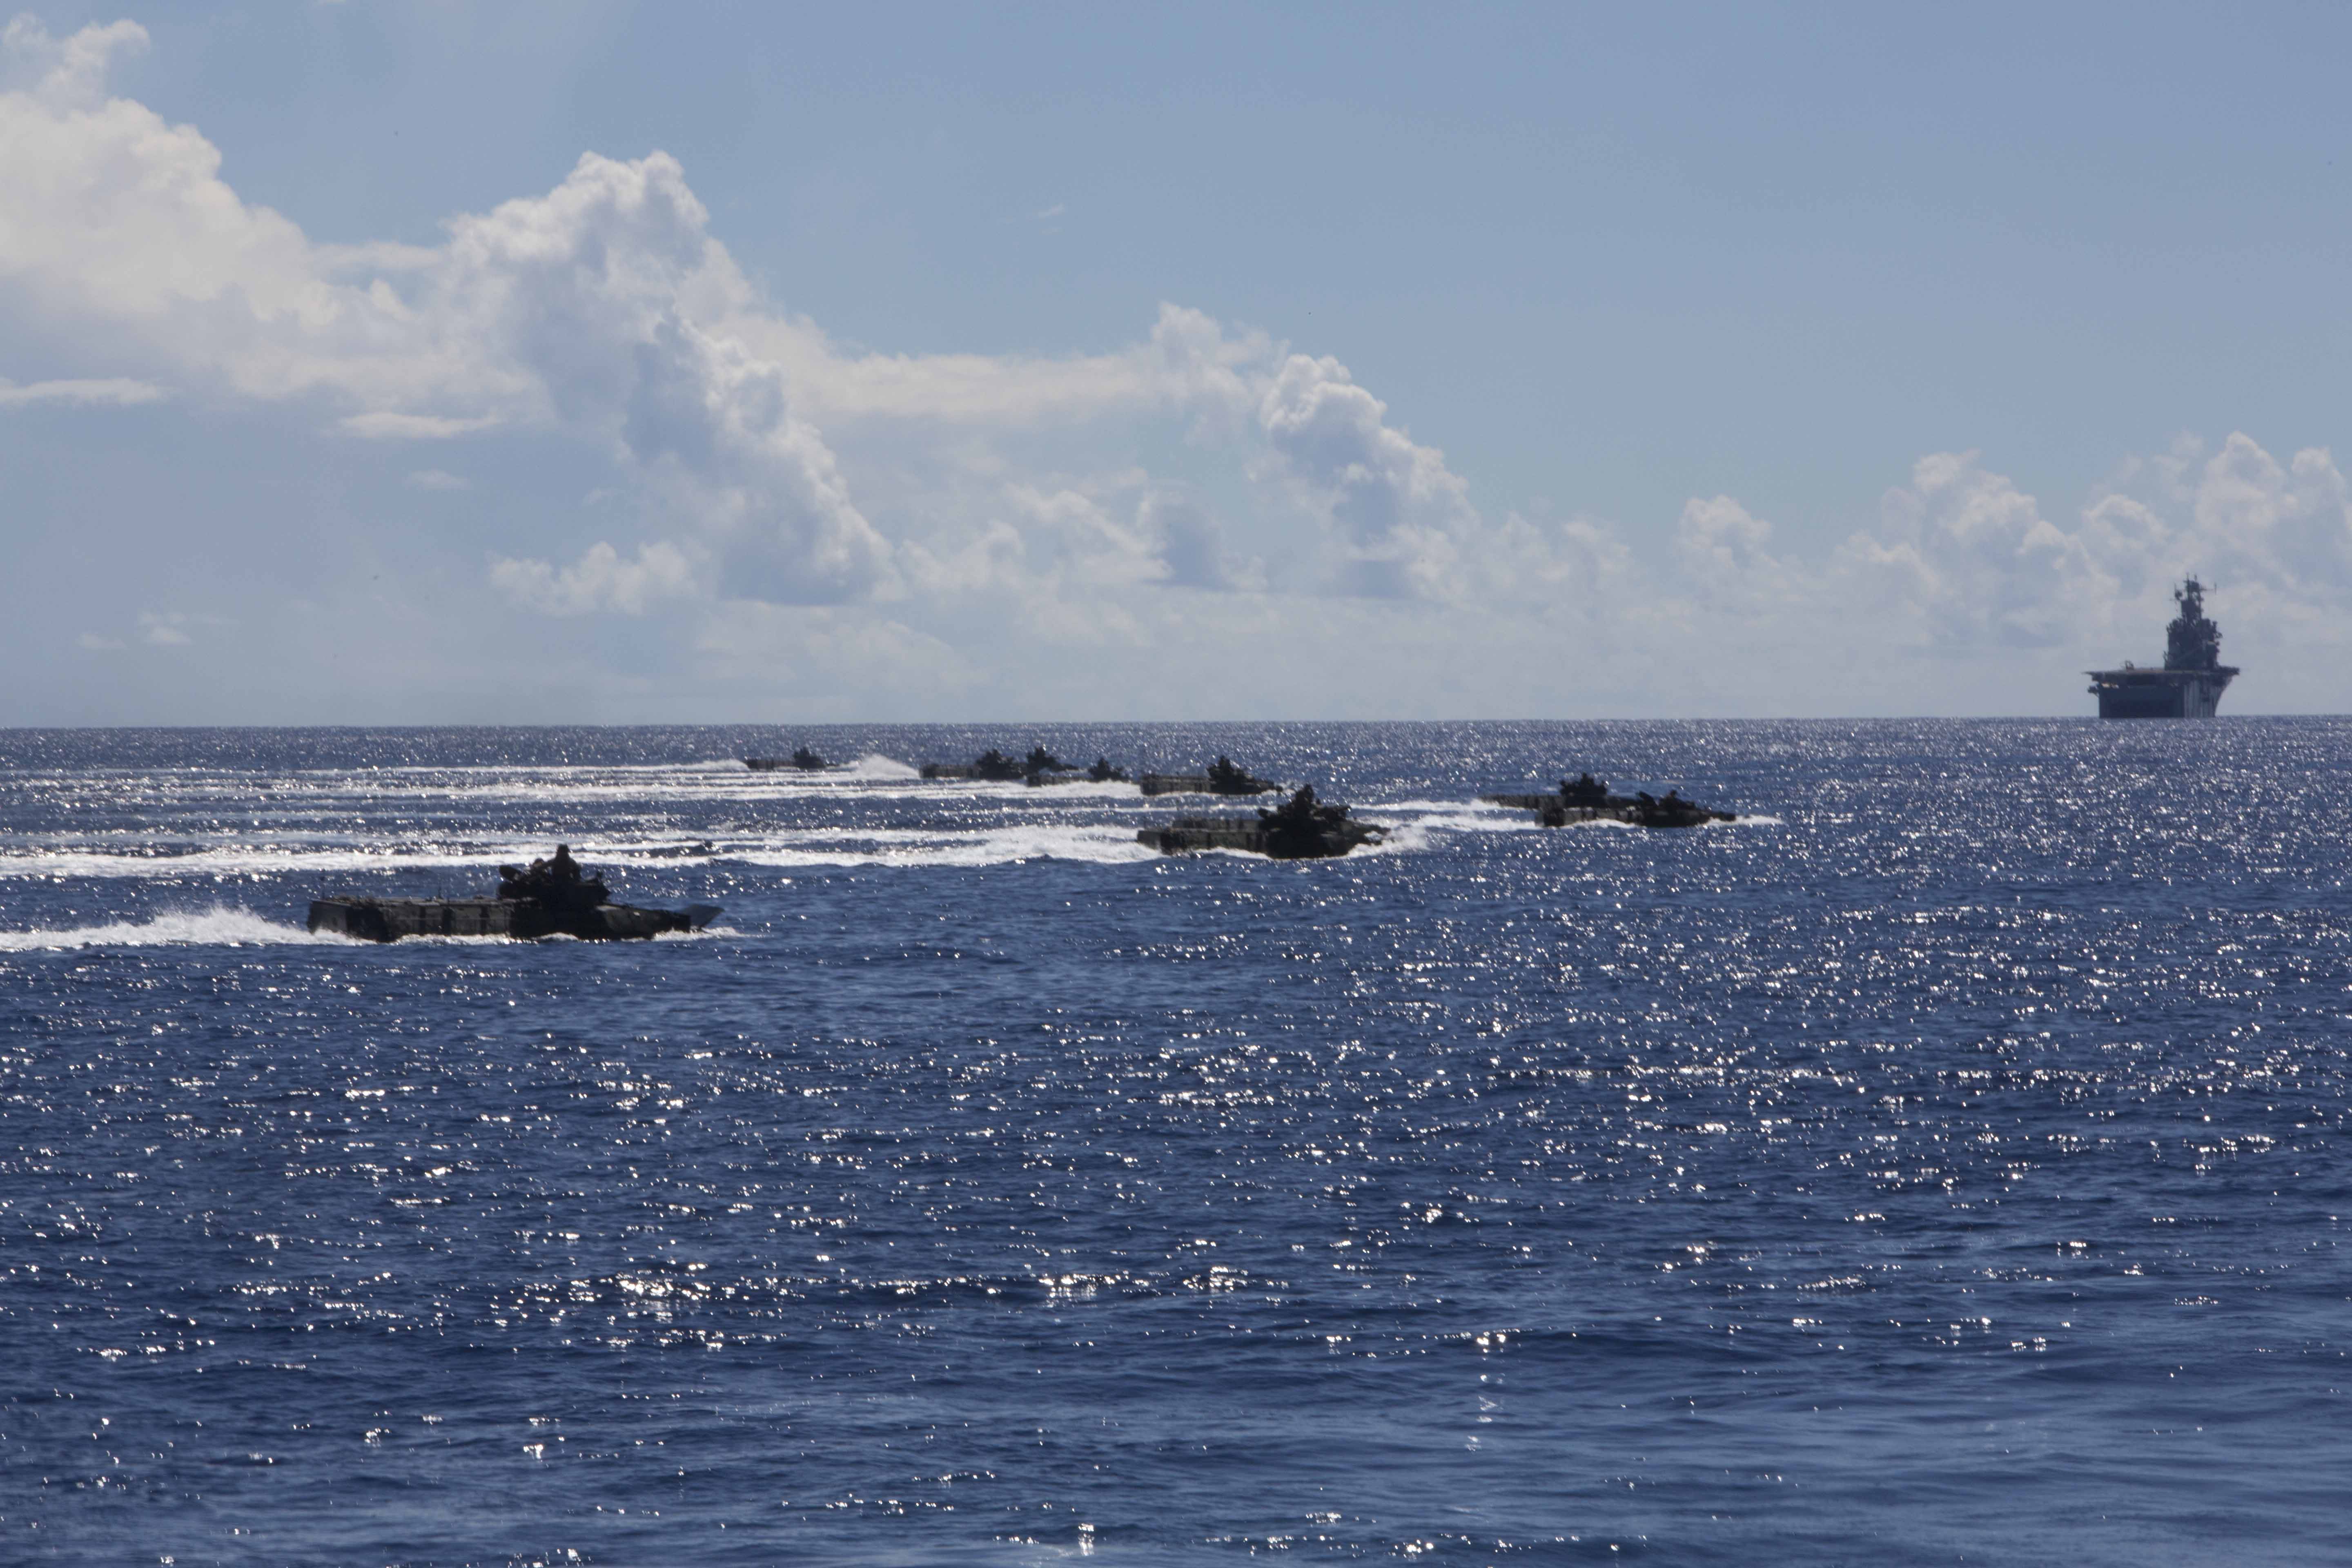 U.S. Marines with Company I, Battalion Landing Team 3rd Battalion, 5th Marines, 31st Marine Expeditionary Unit (MEU), conduct training with Navy Beach Unit 7 Vehicles as part of Amphibious Integration Training (AIT) at sea on Sept 4, 2014. US Marine Corps Photo